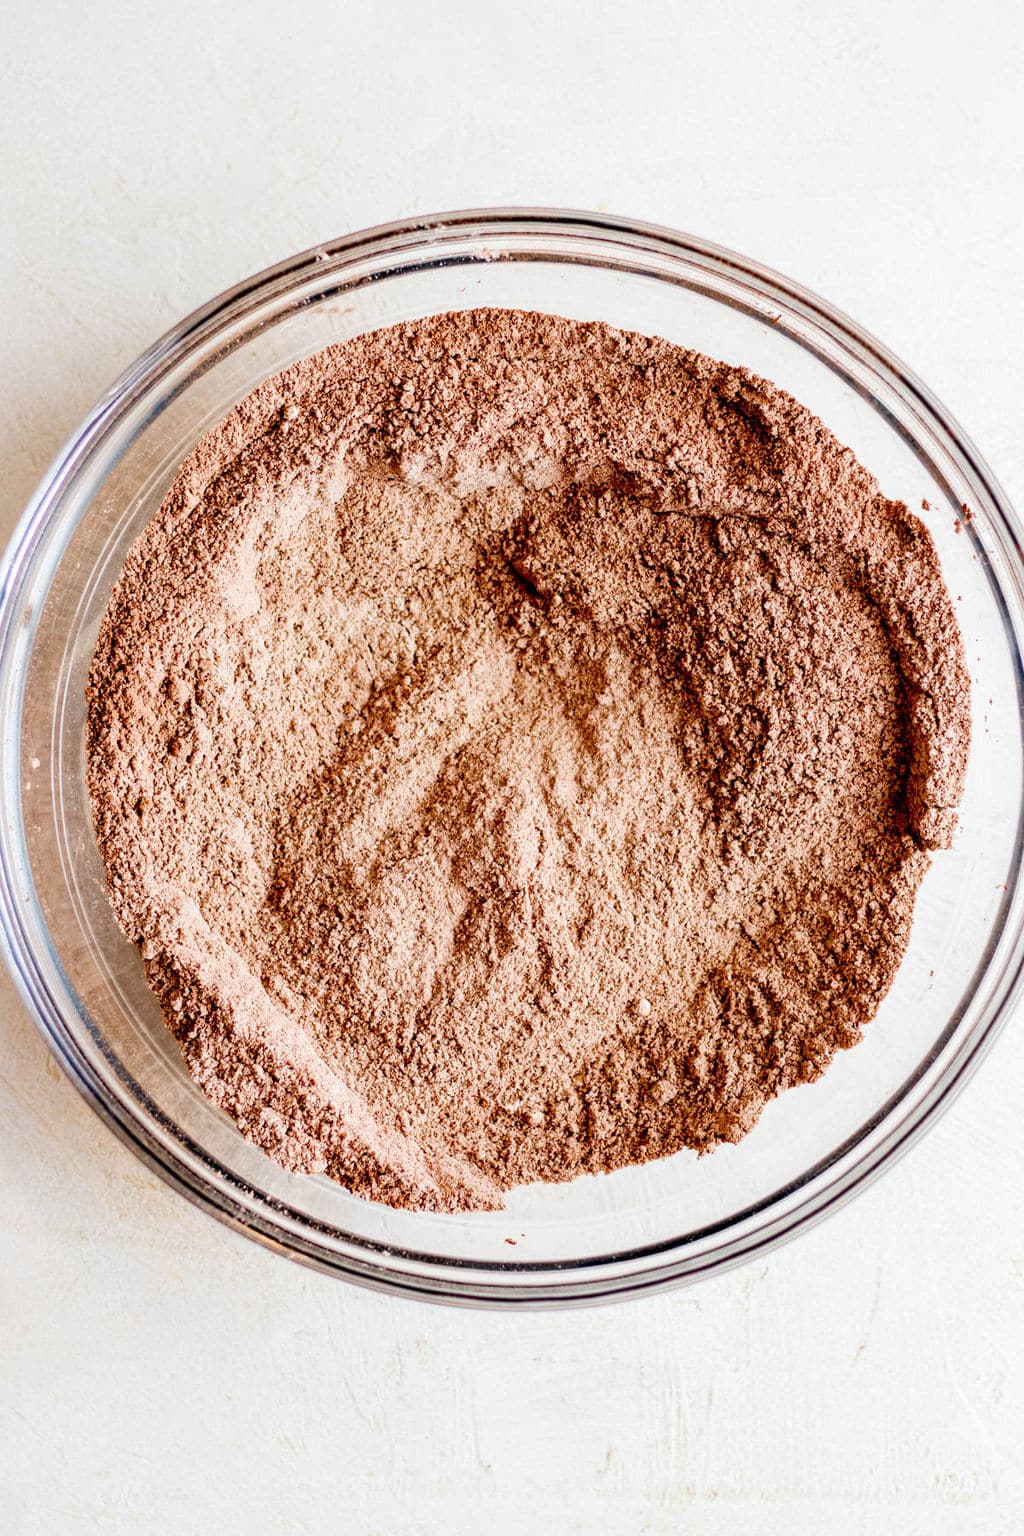 dry baking ingredients and cocoa powder in a glass bowl.